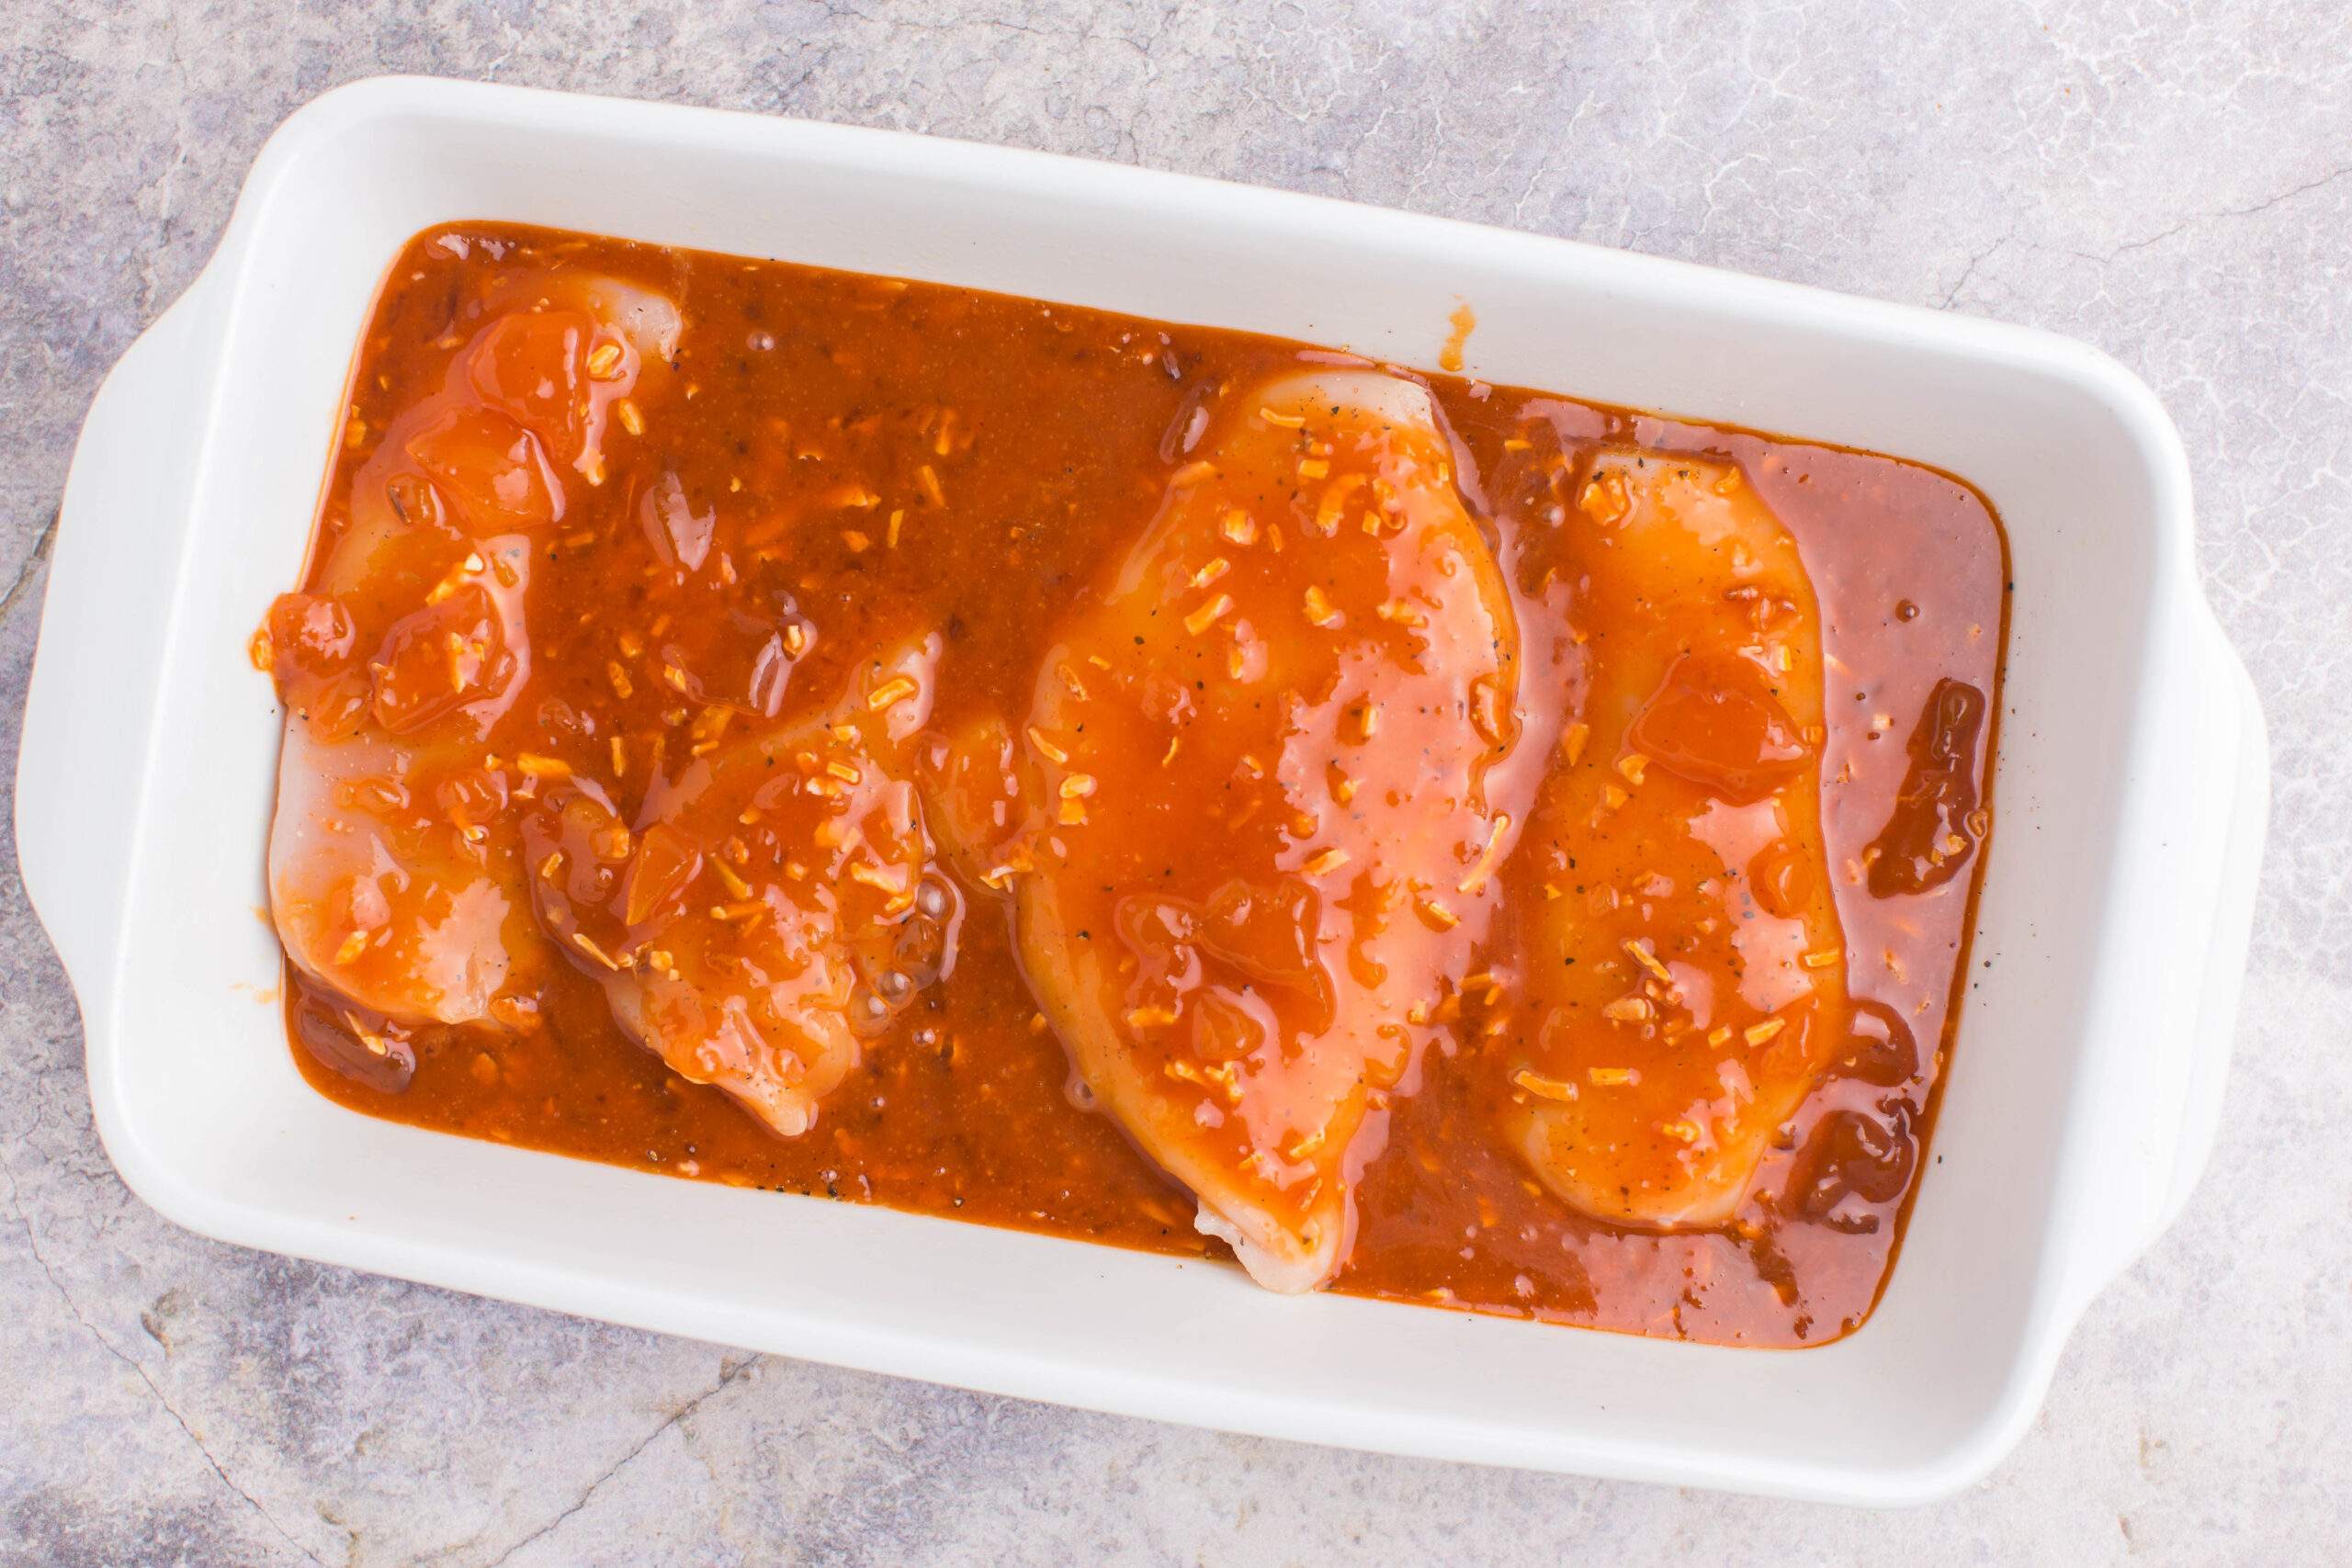 sauce poured over chicken i dish